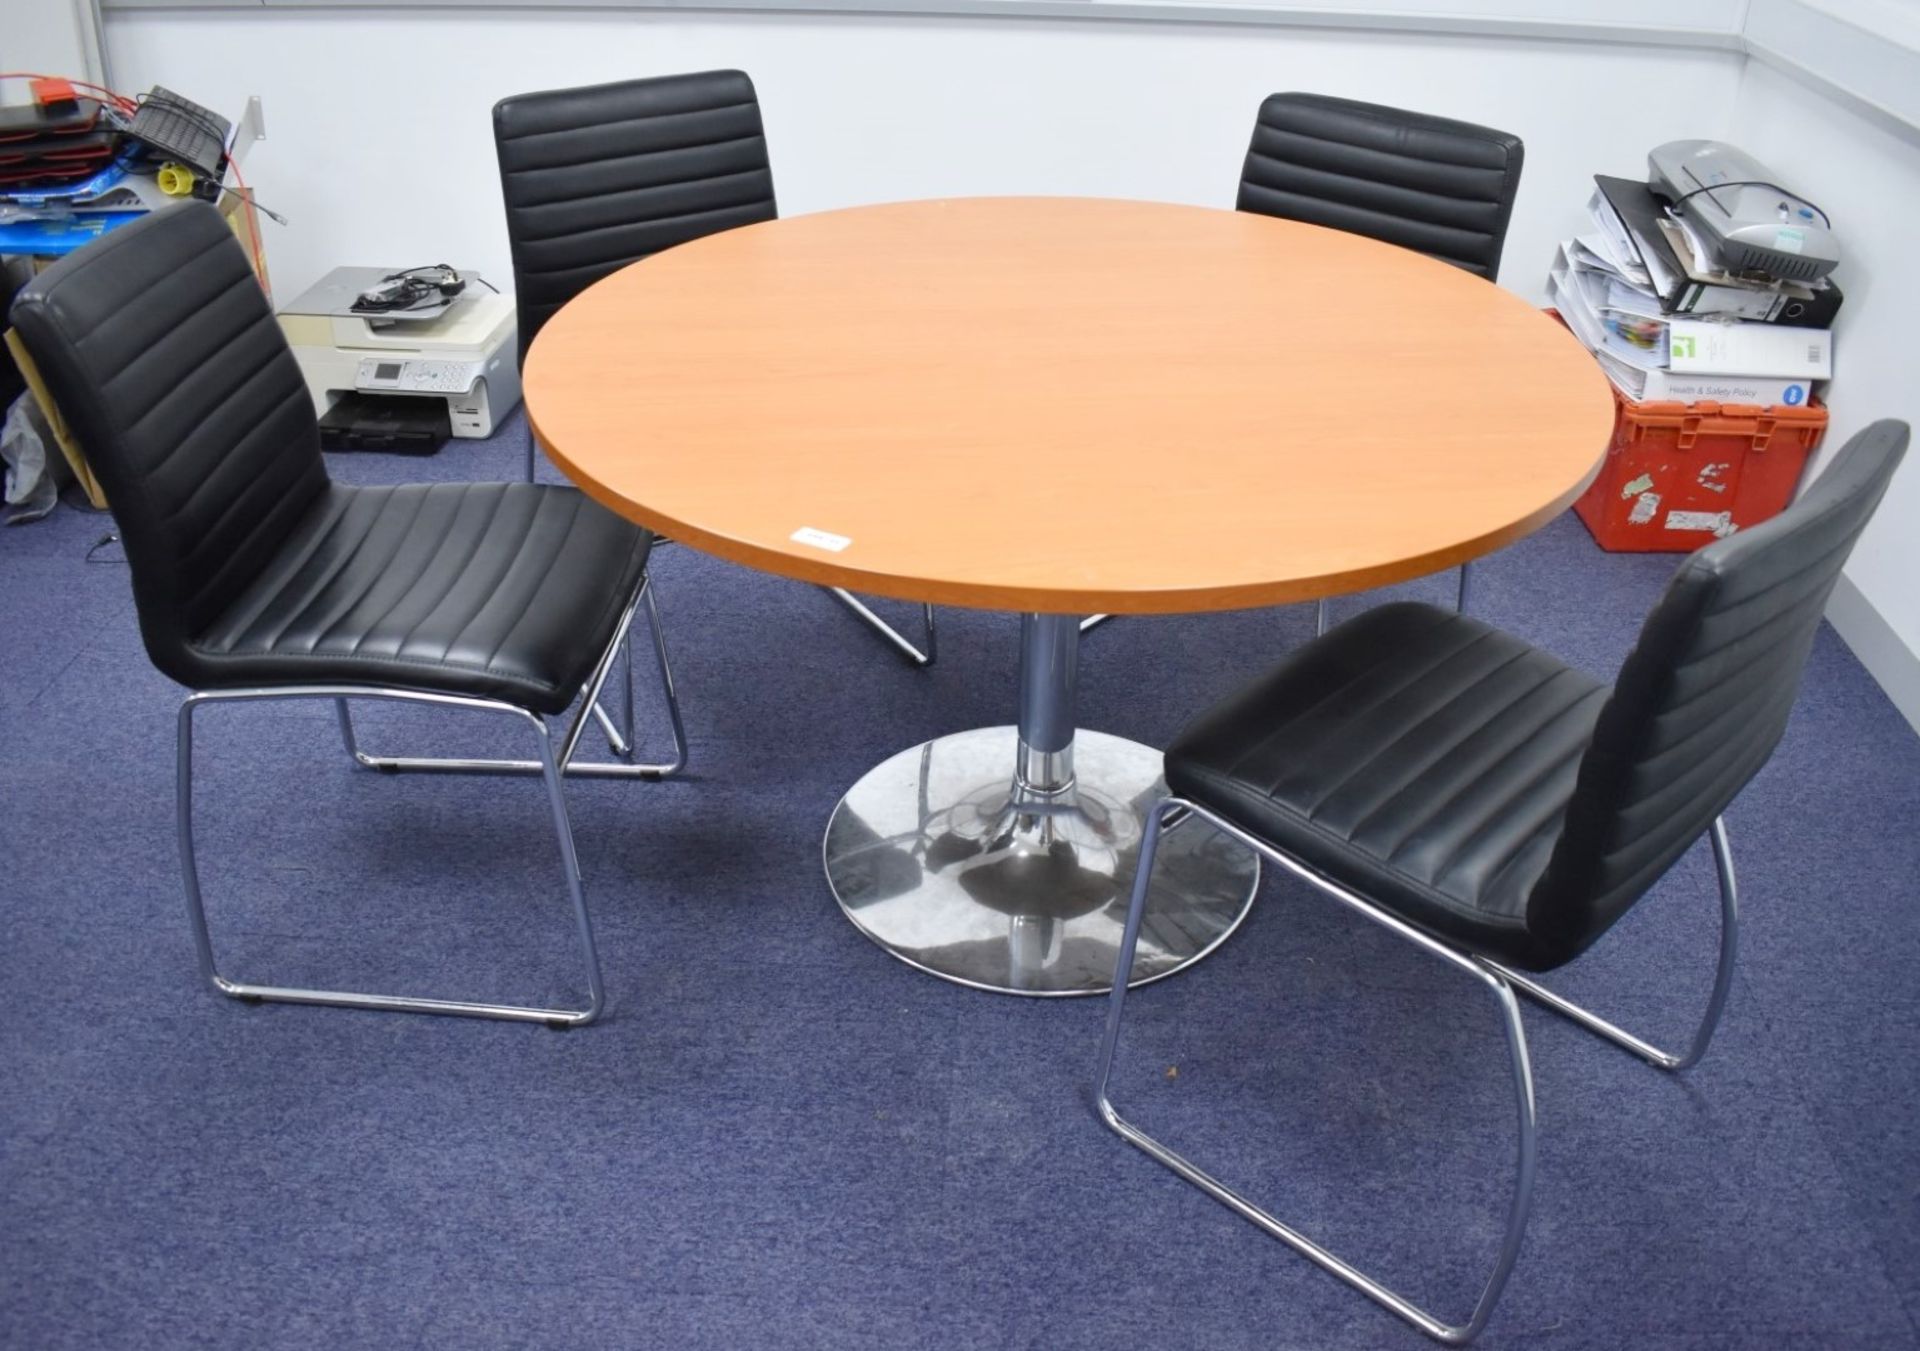 1 x Cherry Wood Office Meeting Table With Chrome Base and Four Black Faux Leather Office Chairs